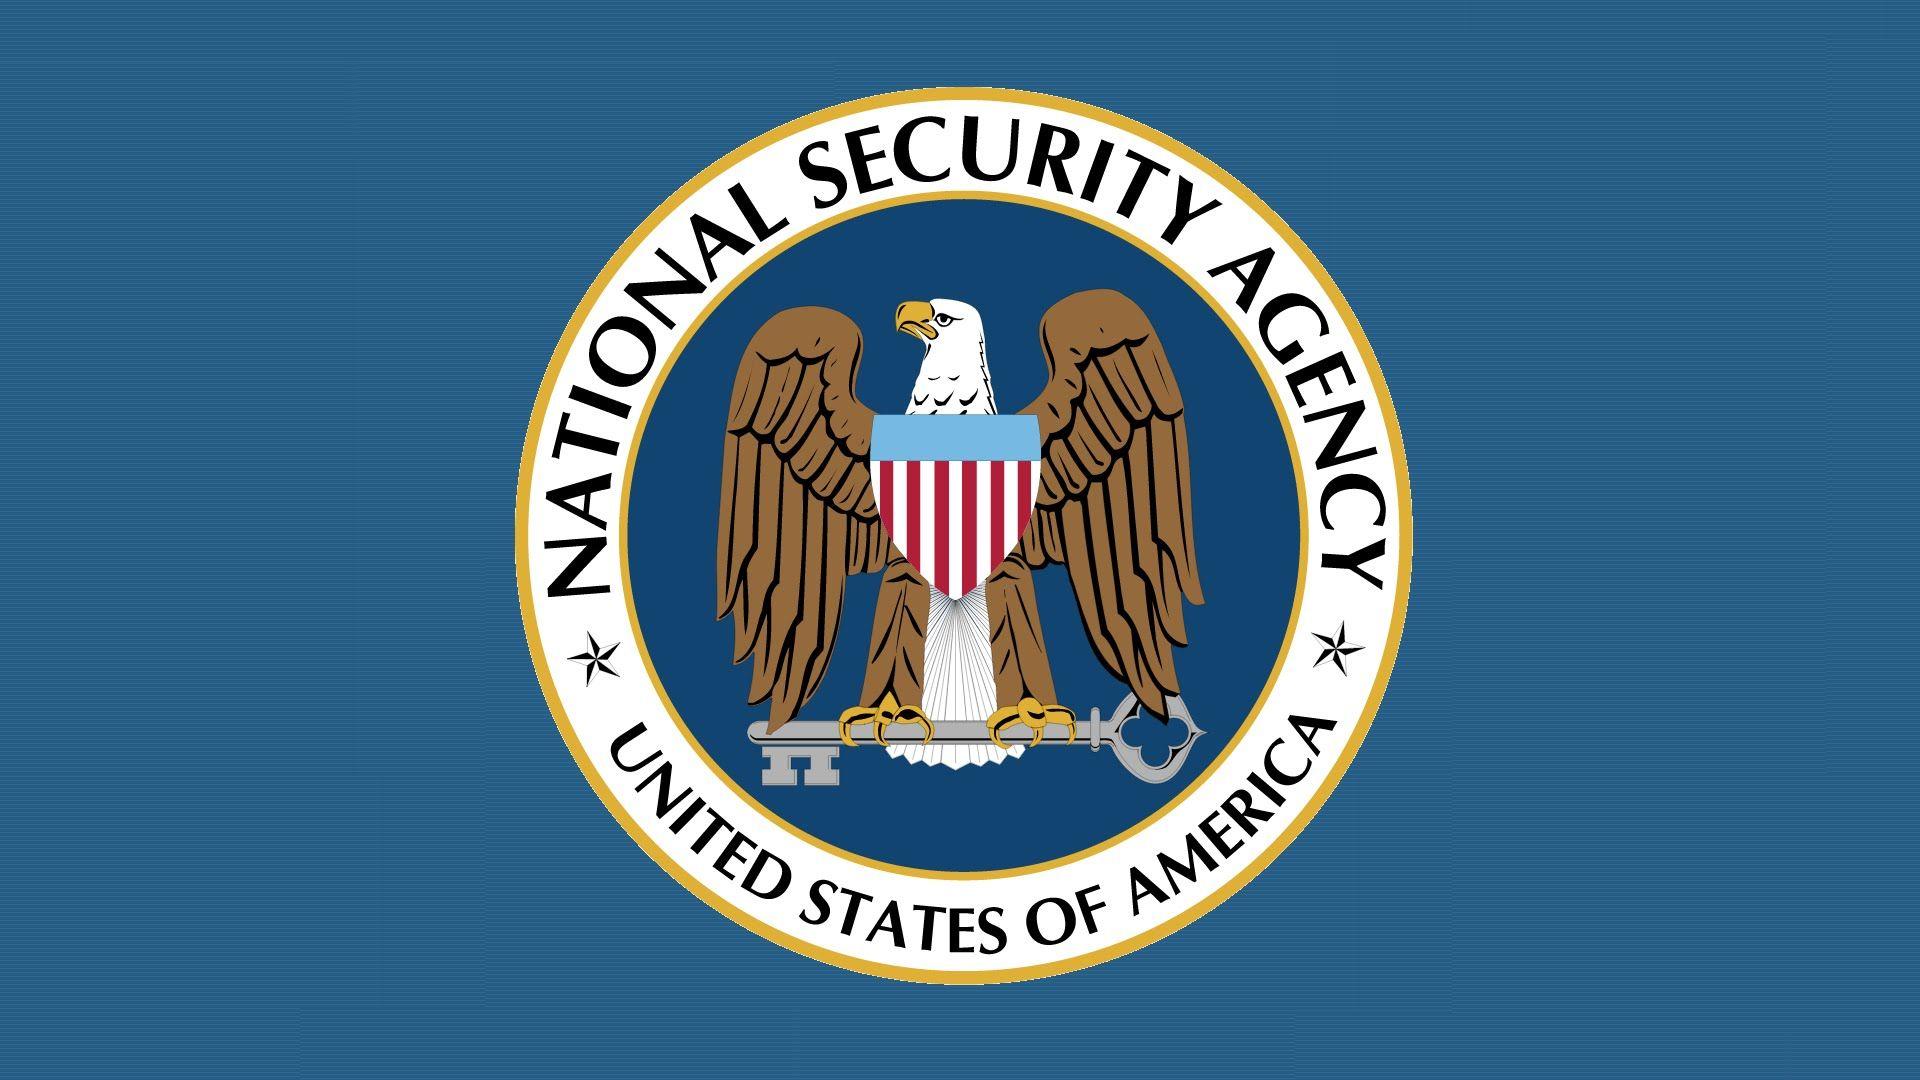 National Security Agency Wallpaper Free National Security Agency Background